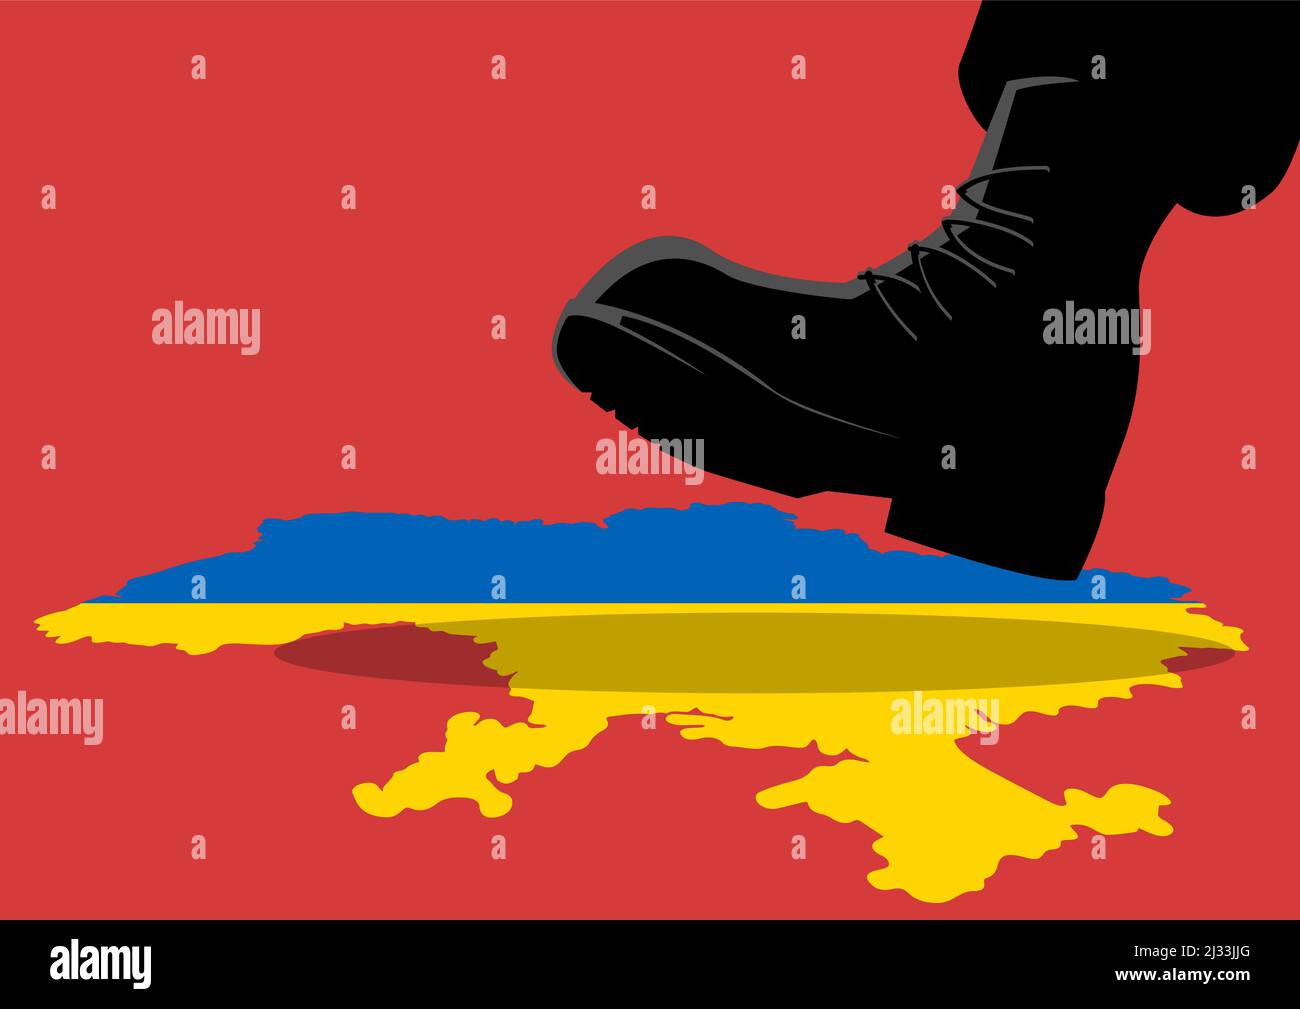 Vector illustration of a giant army boot trampling on Ukraine map, invasion, conflict, under pressure, war concept Stock Vector